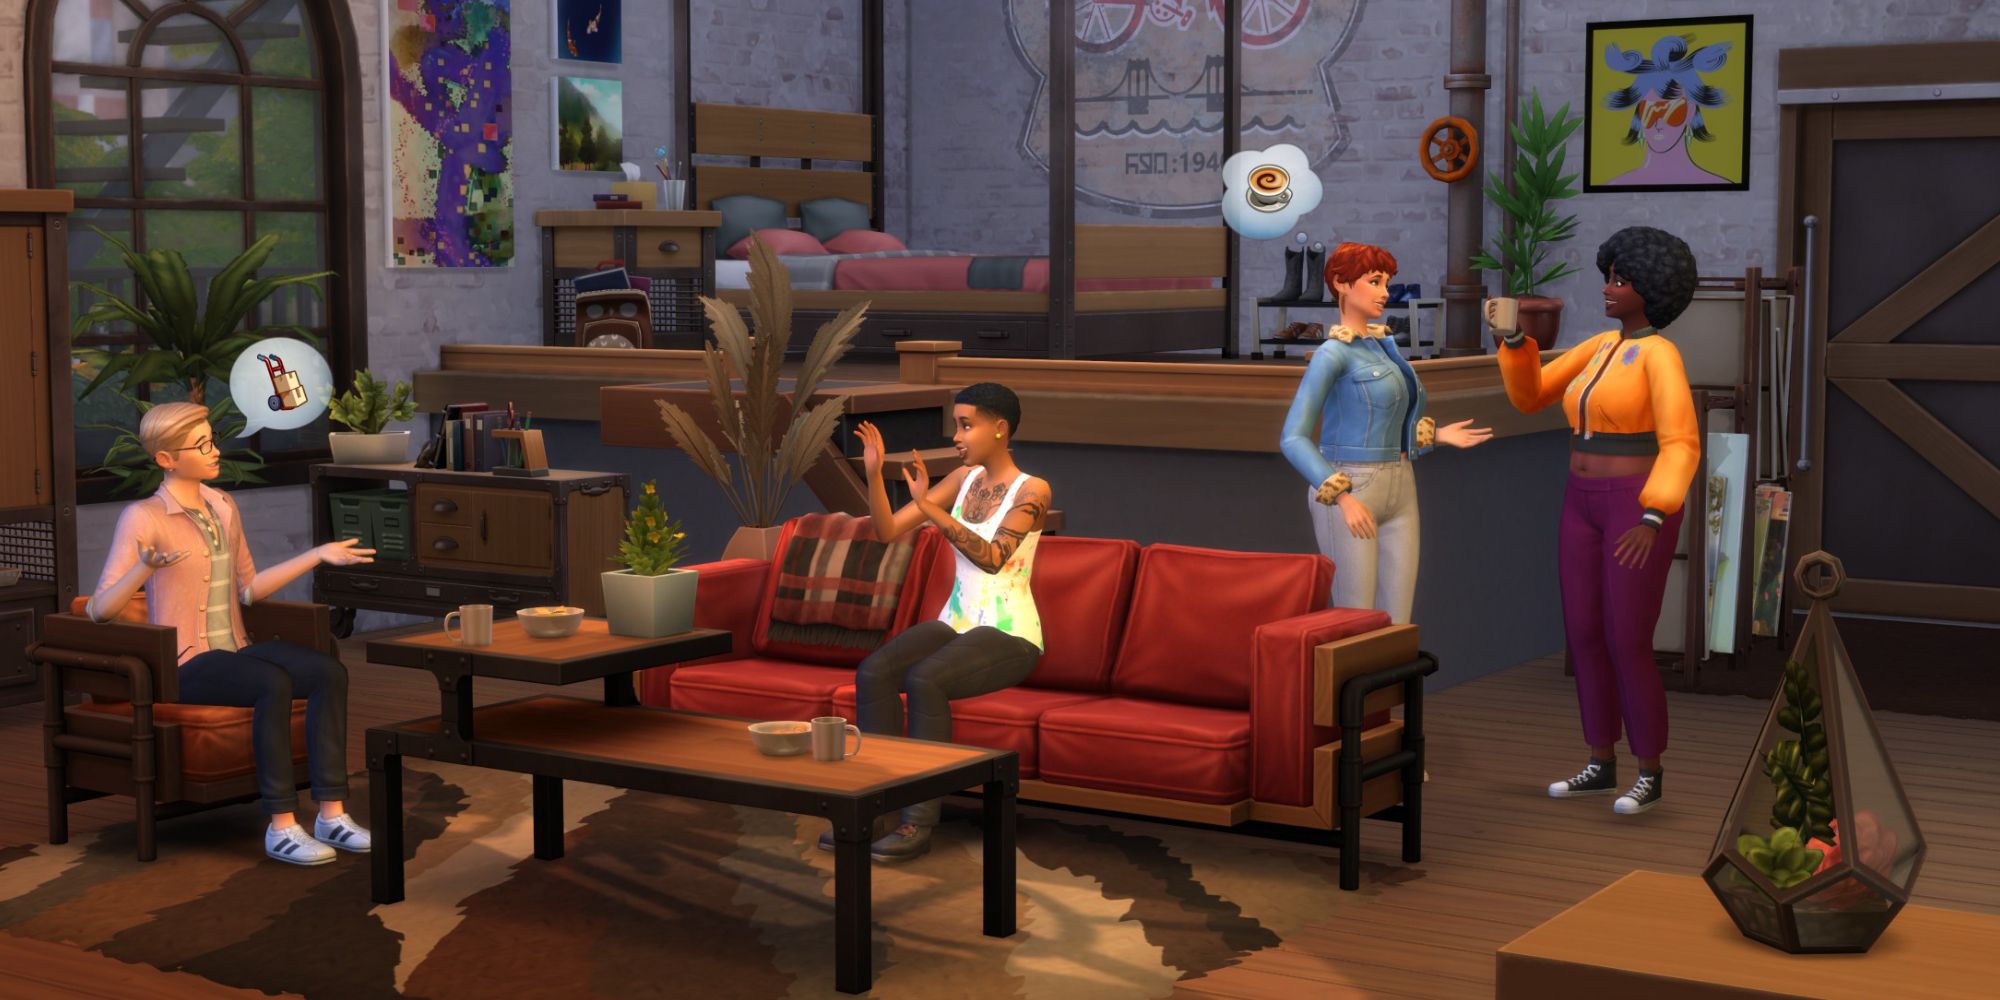 Sims 4 Industrial Loft lounge with sims relaxing